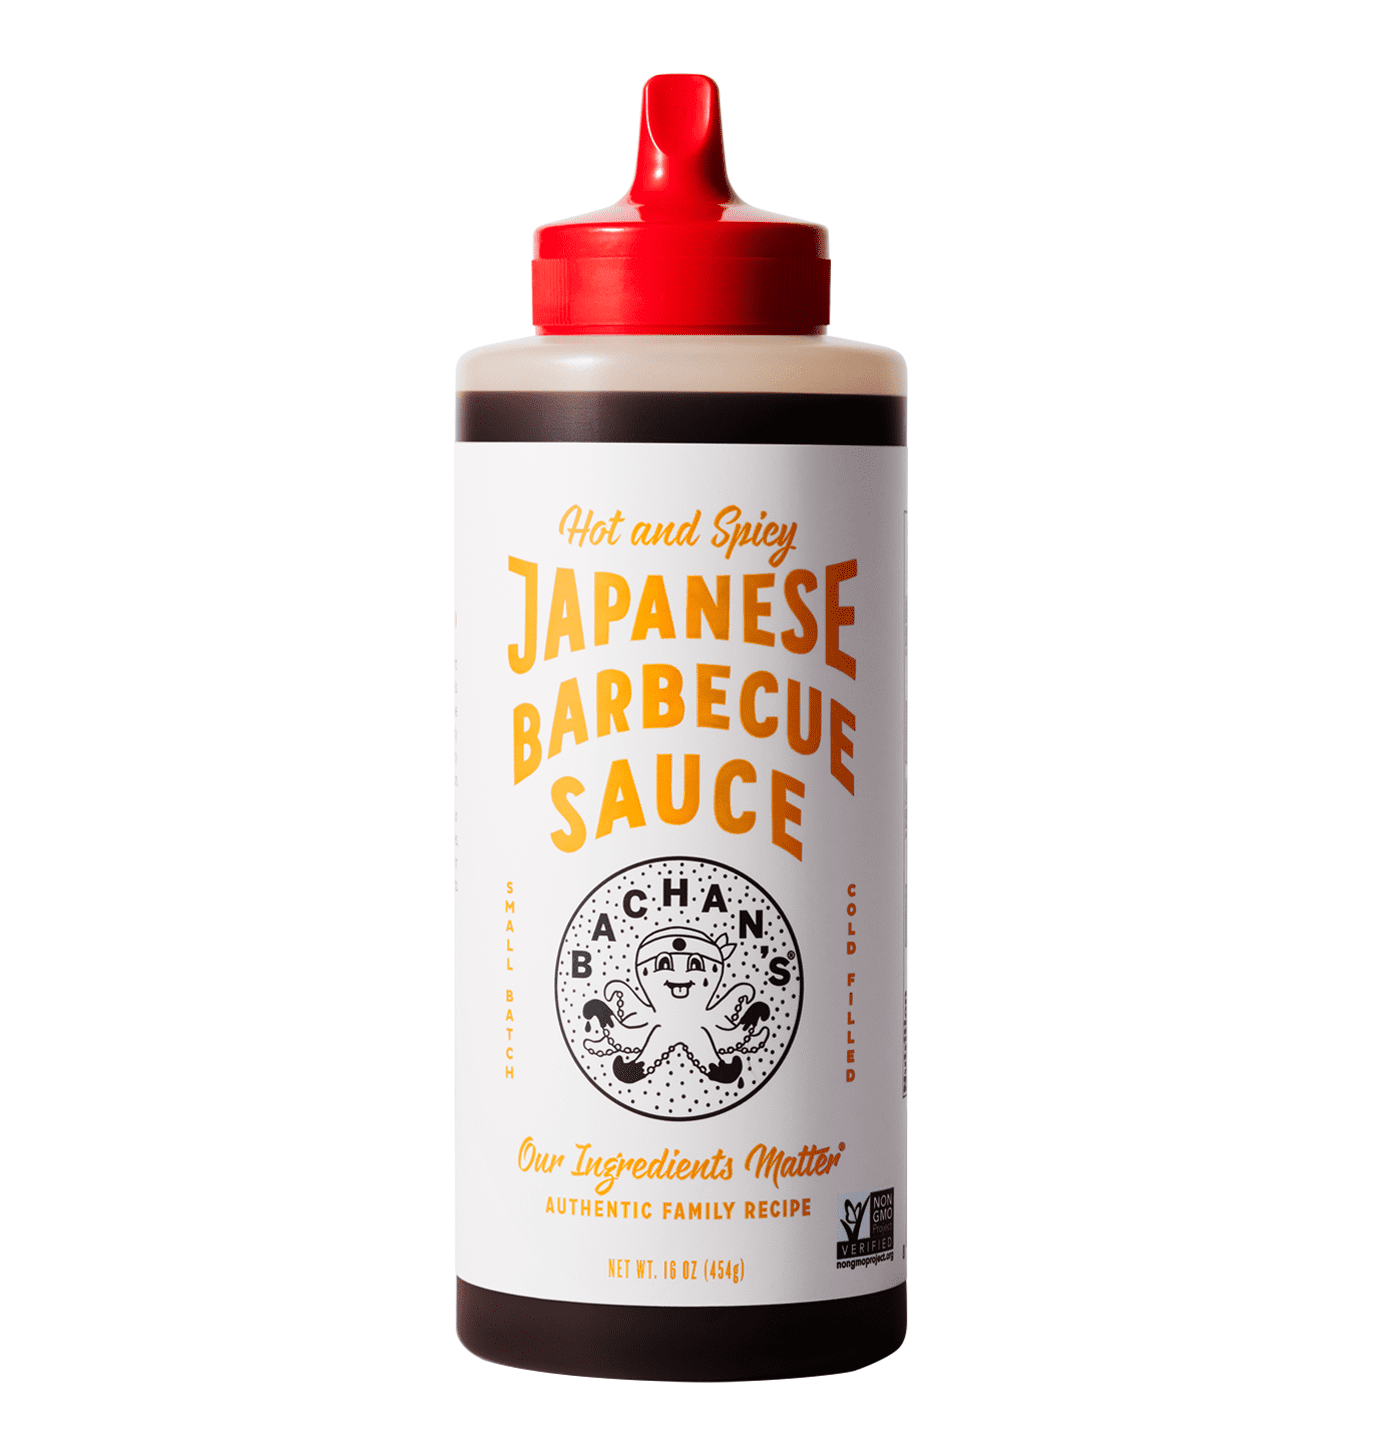 Picture of Bachan 8079044 16 oz Hot & Spicy Japanese Teriyaki Barbecue Sauce